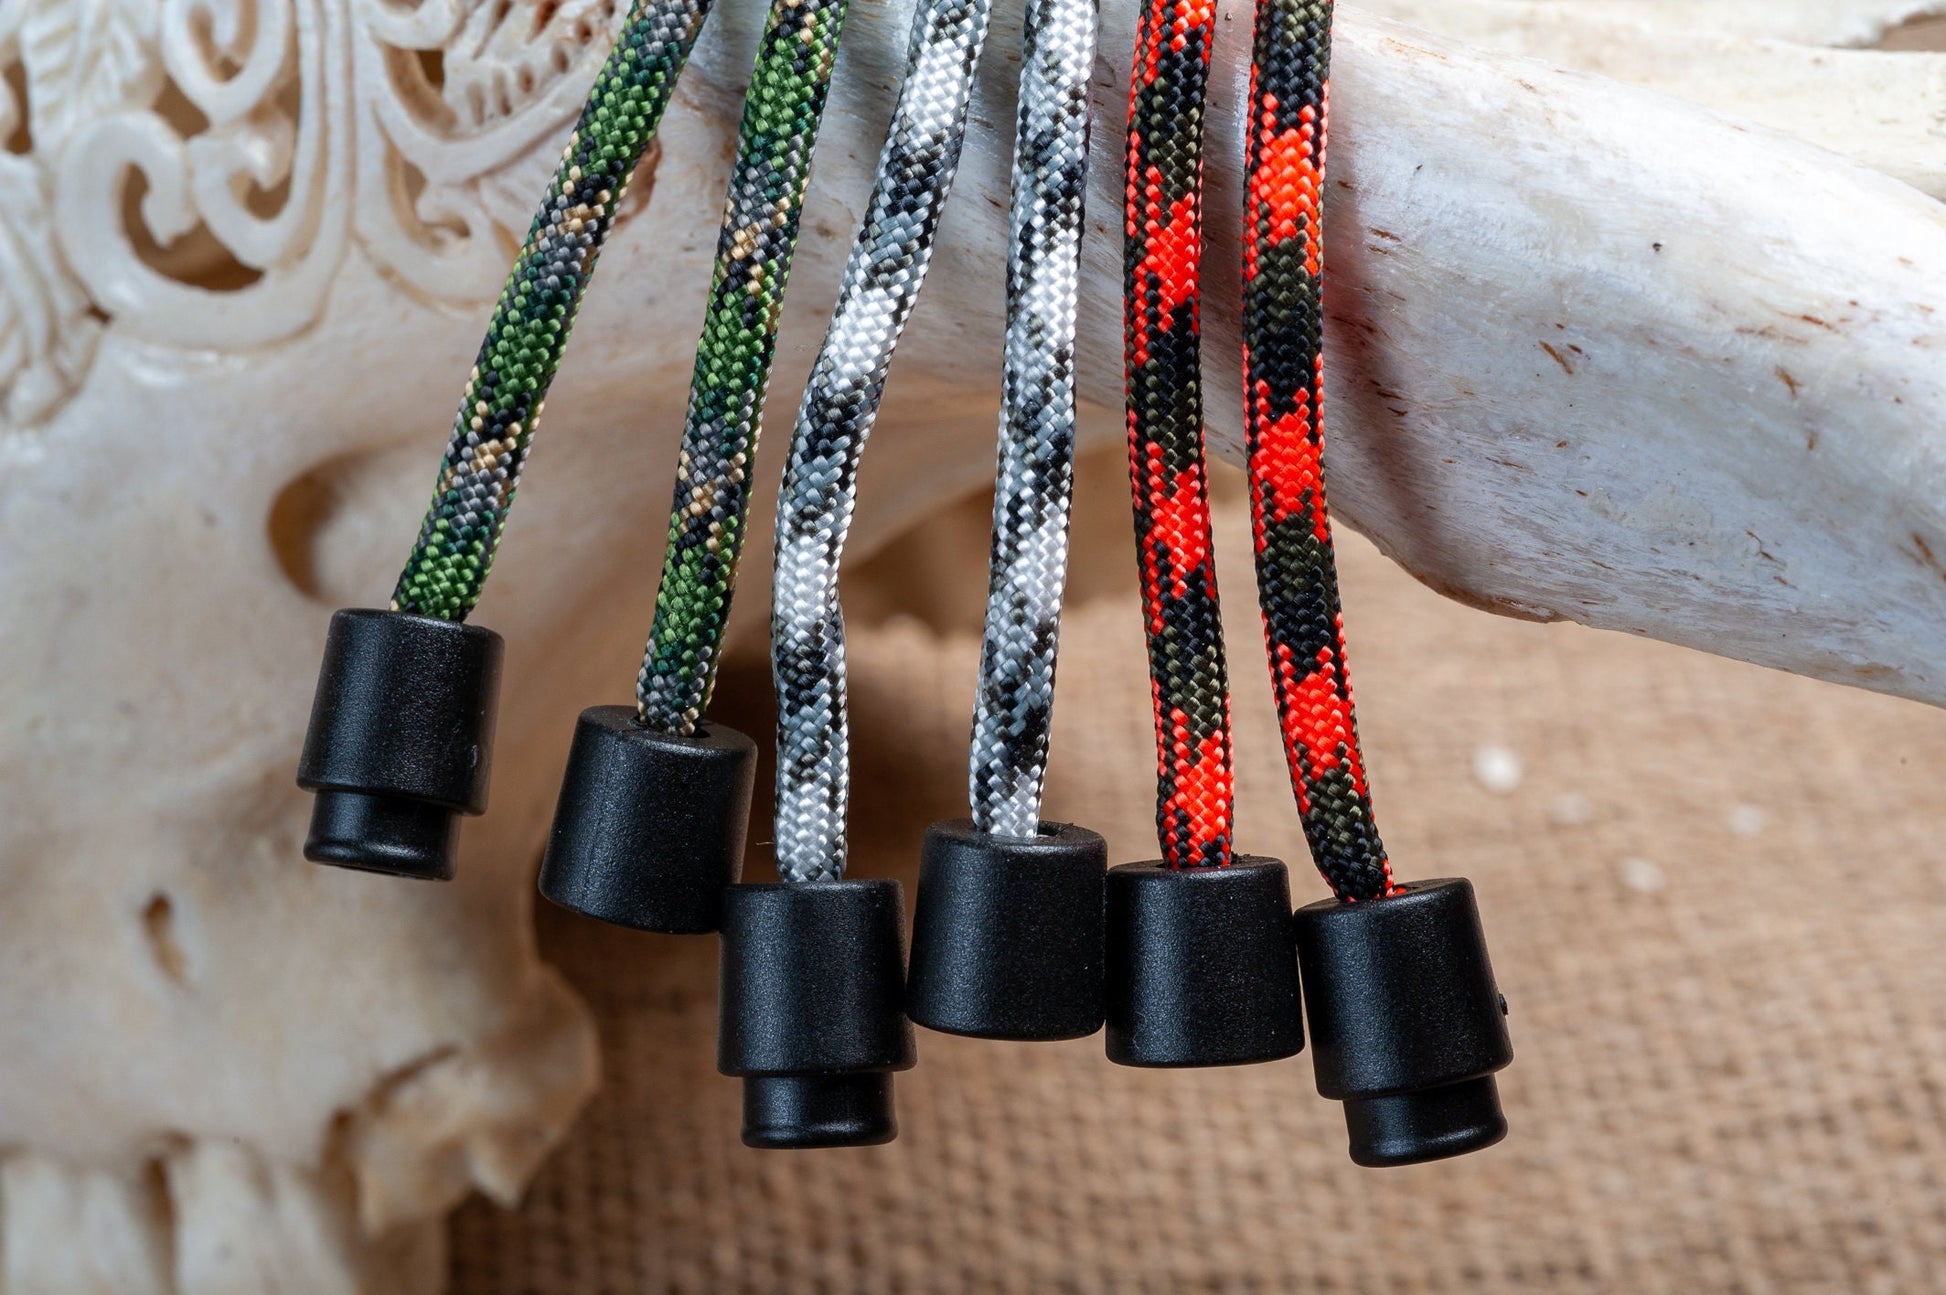 HK Hook Paracord Neck Lanyard With Choice of 5 Beads | Breakaway Clasp | Camo Collection